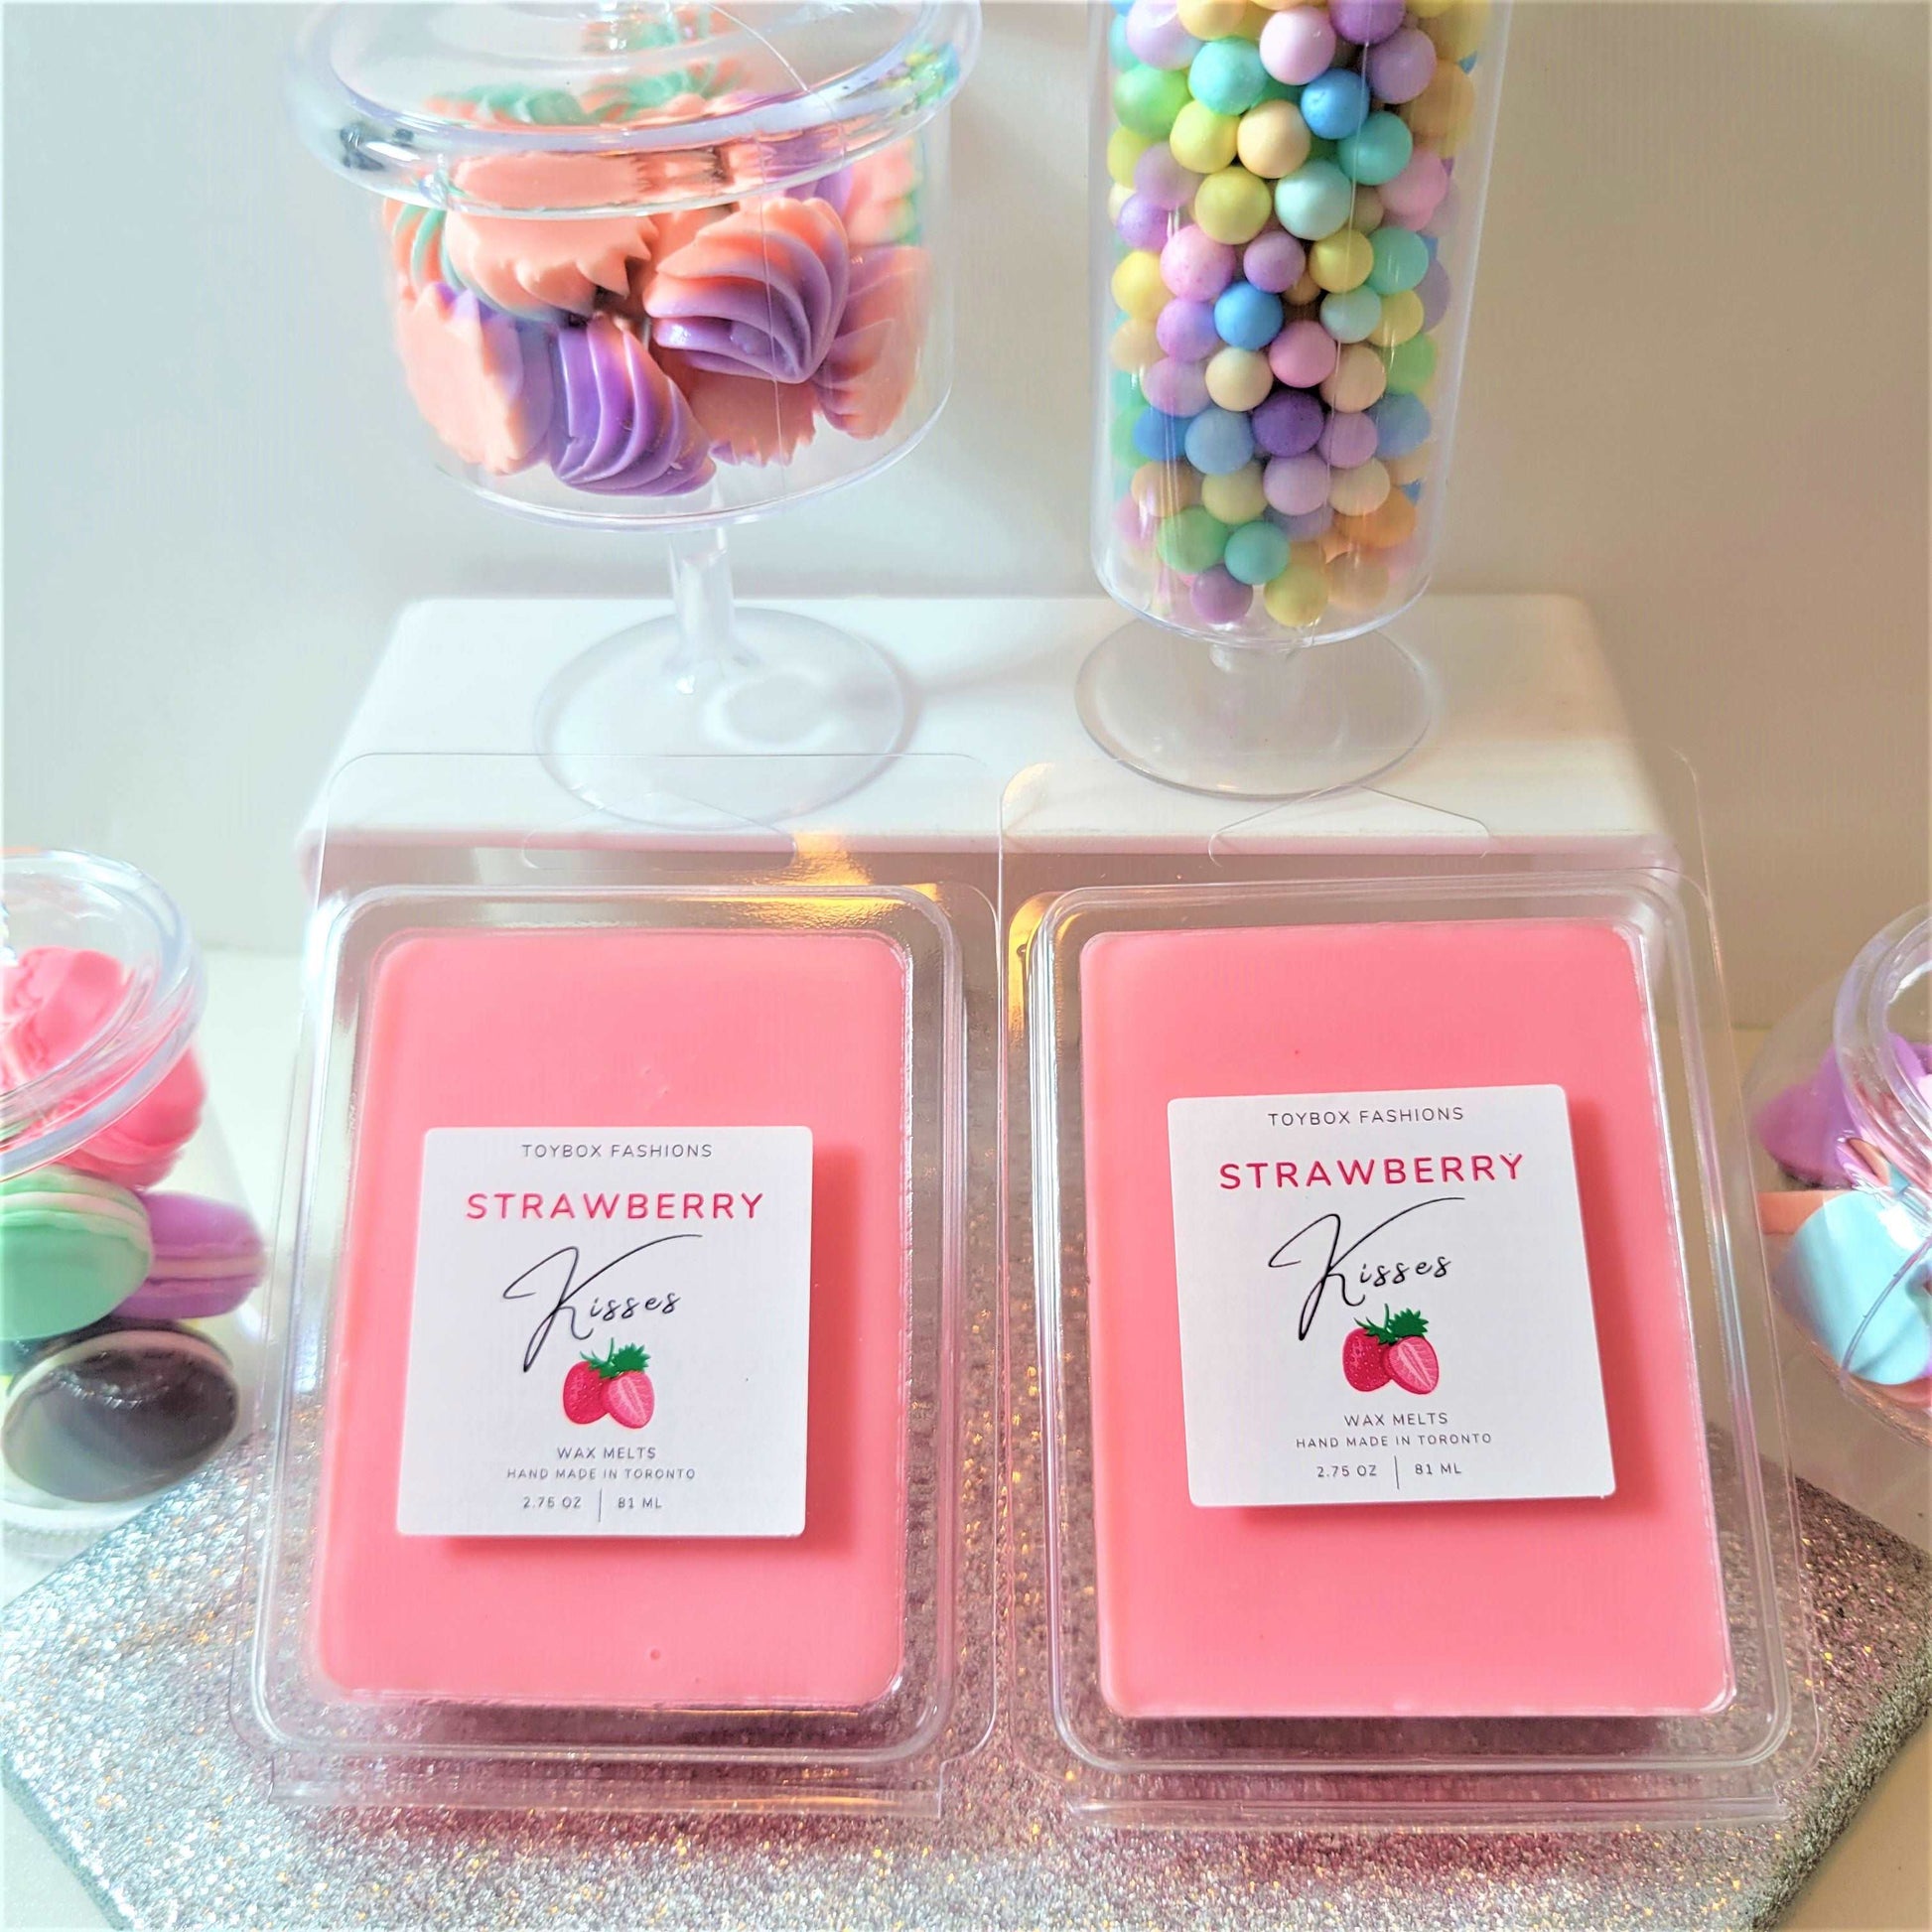 Cafe Delights Strawberry Shortcake Scented Soy Wax Melts 81 ml/ 2.7 oz